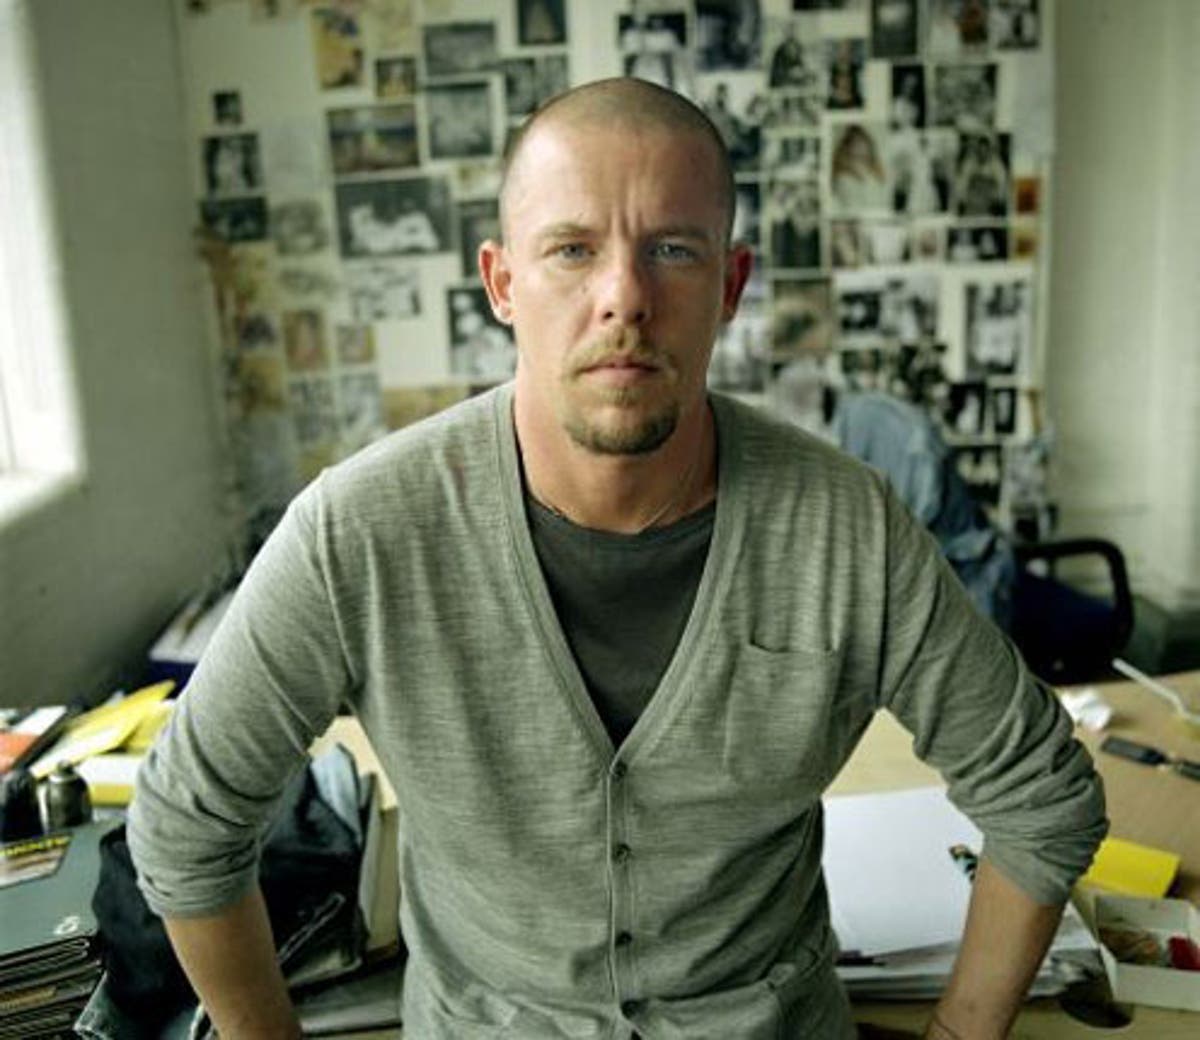 Alexander McQueen: Fashion designer who brought shock and drama to the ...